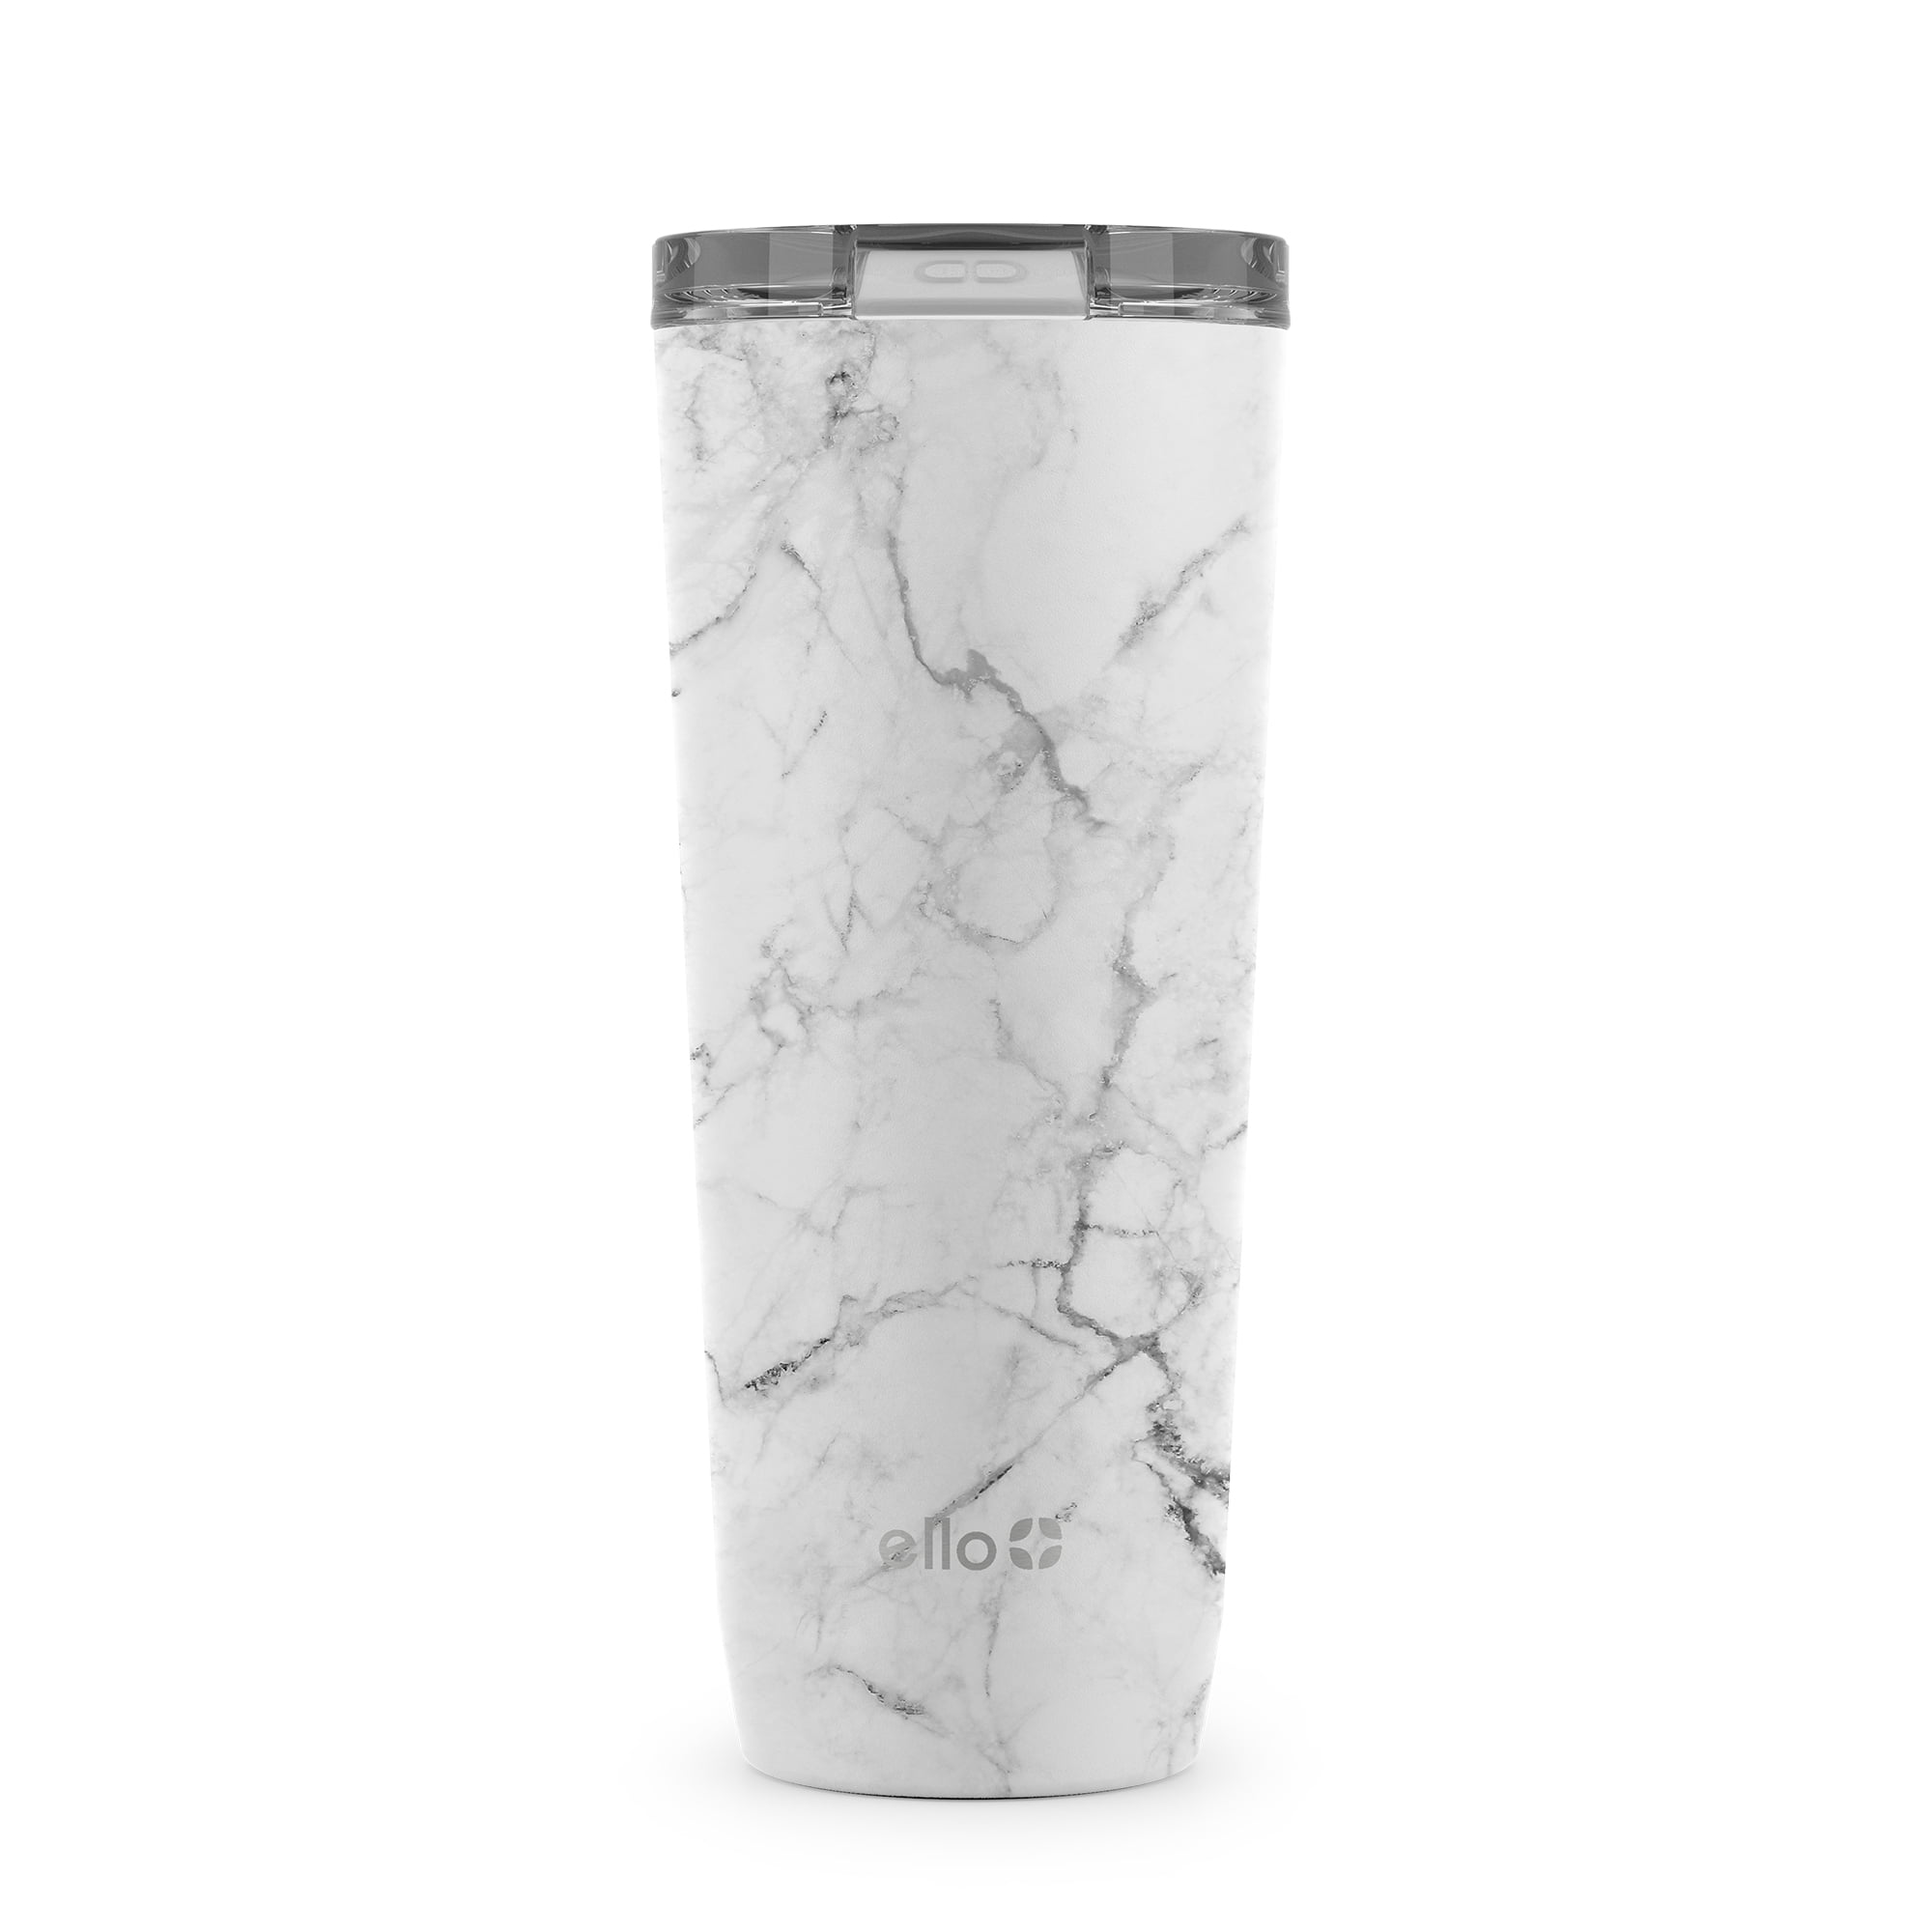 Ello 4-1 Stainless Steel Can Cooler 12oz, White Marble, Men's, Size: 12 oz